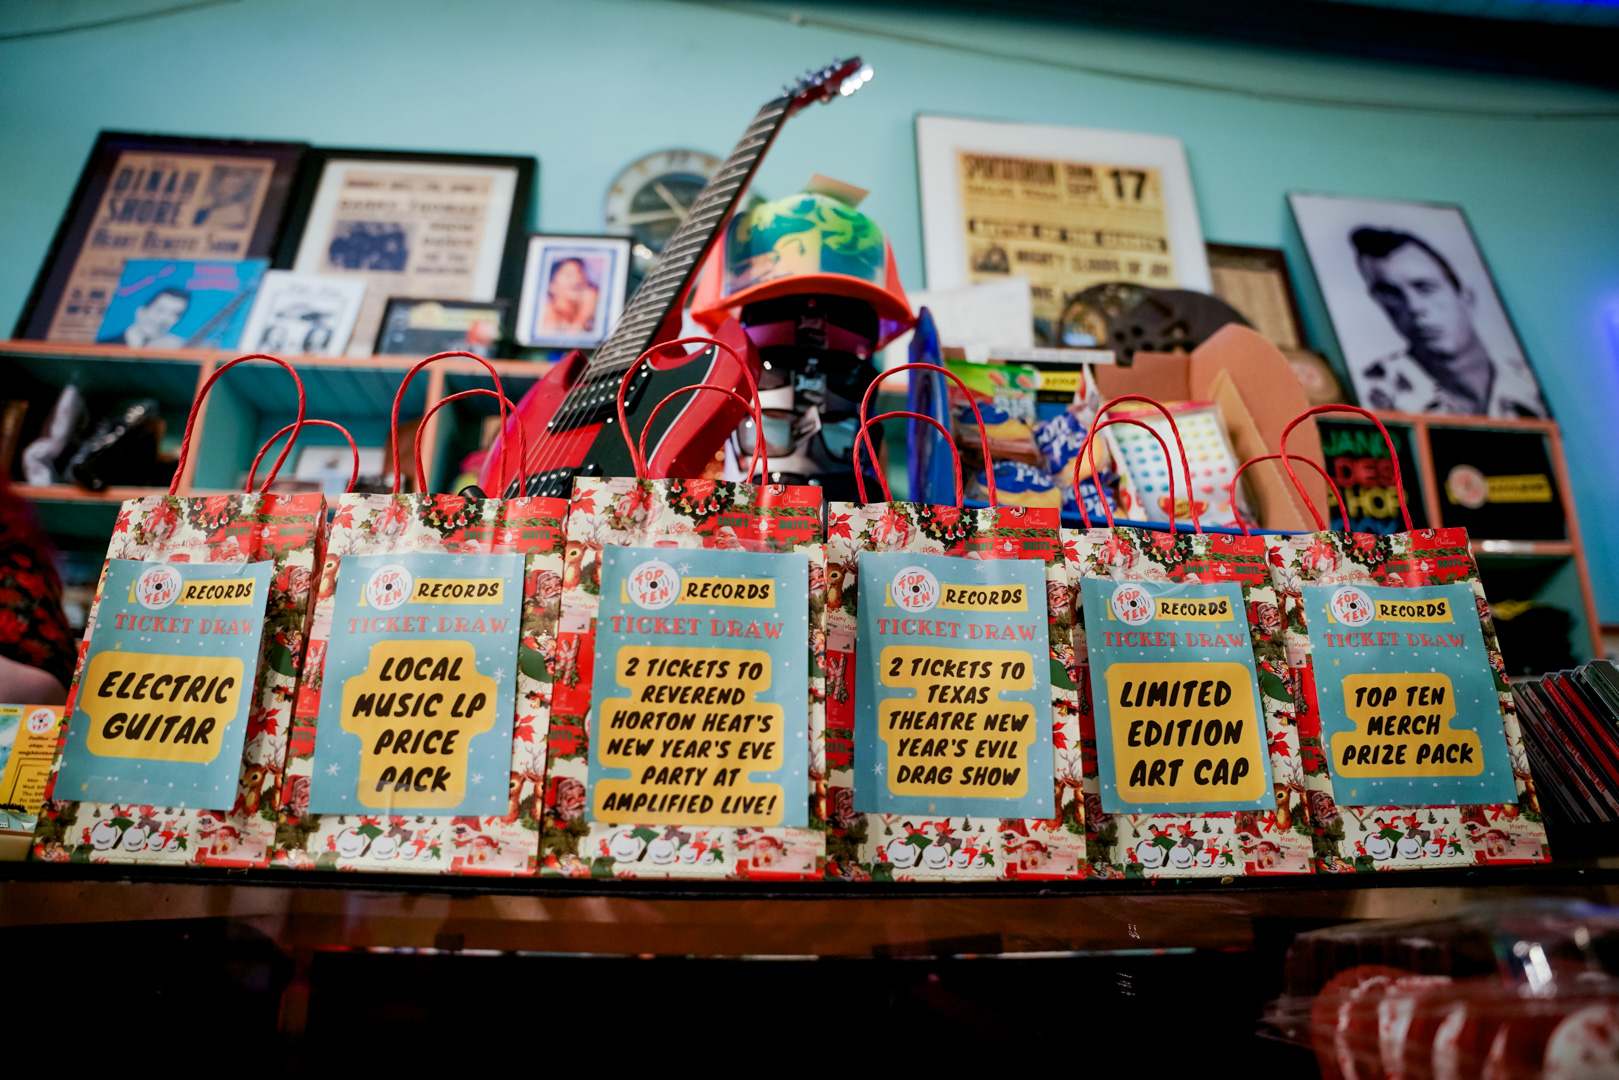 A red guitar and gift bags across a counter